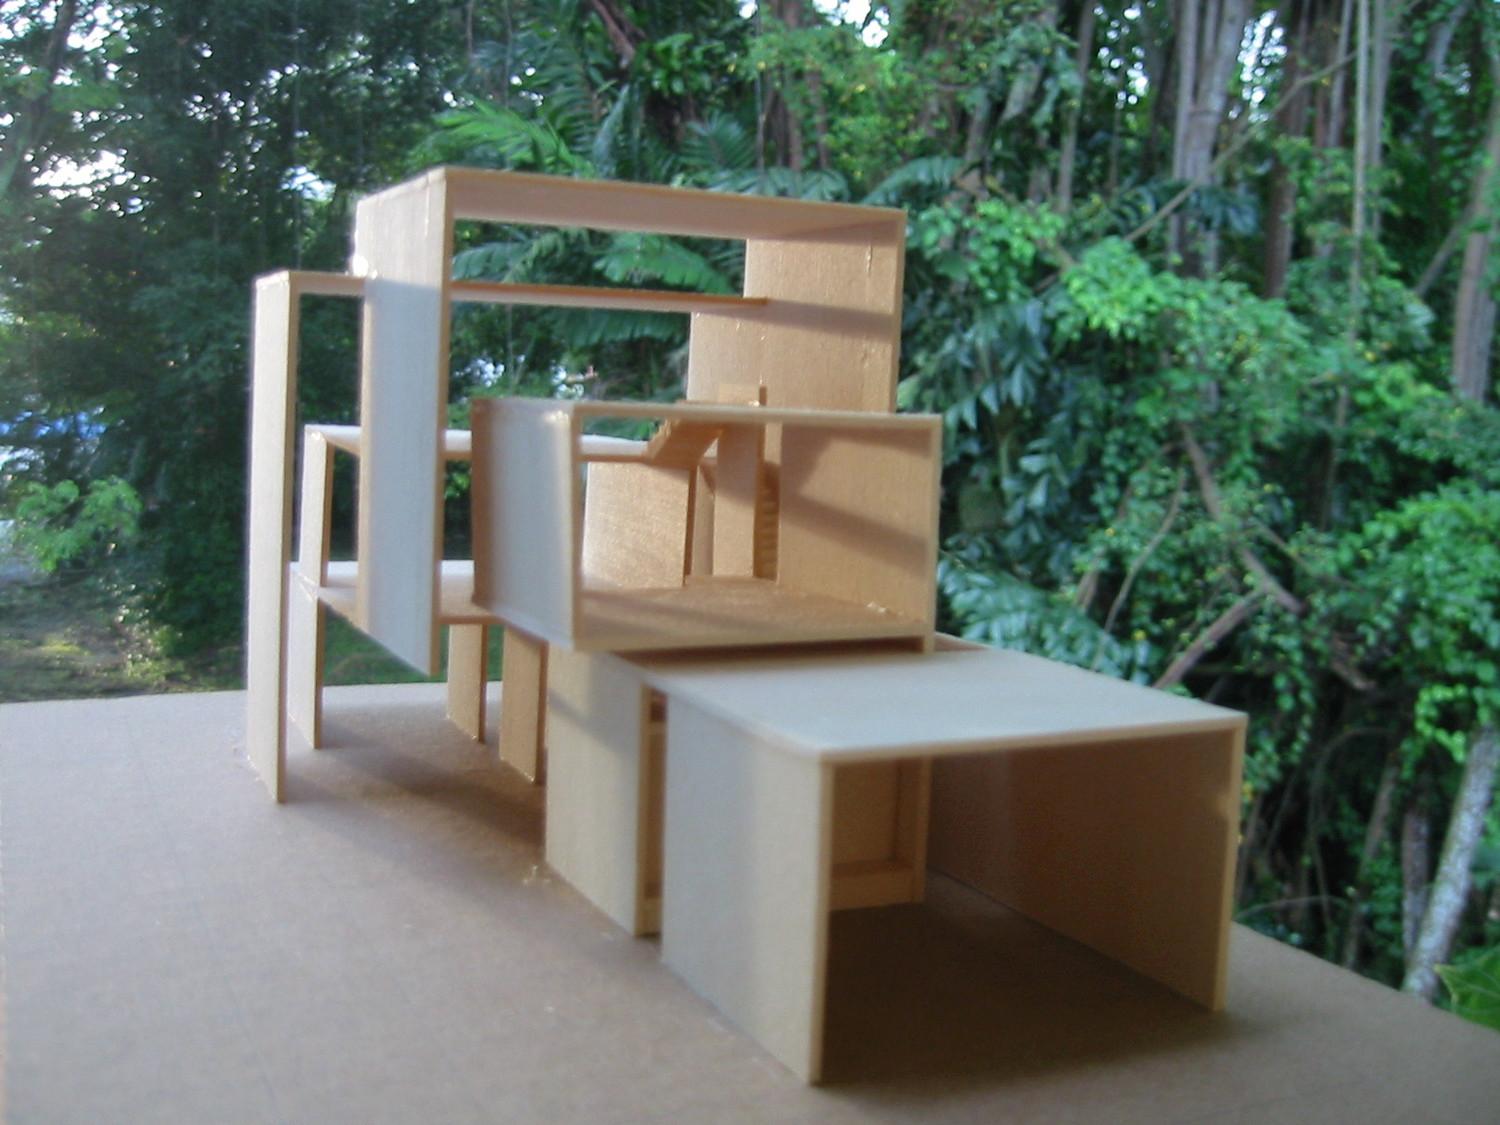 This was later developed, together with scaled drawings, and with a series of mock-ups made of wood boards.